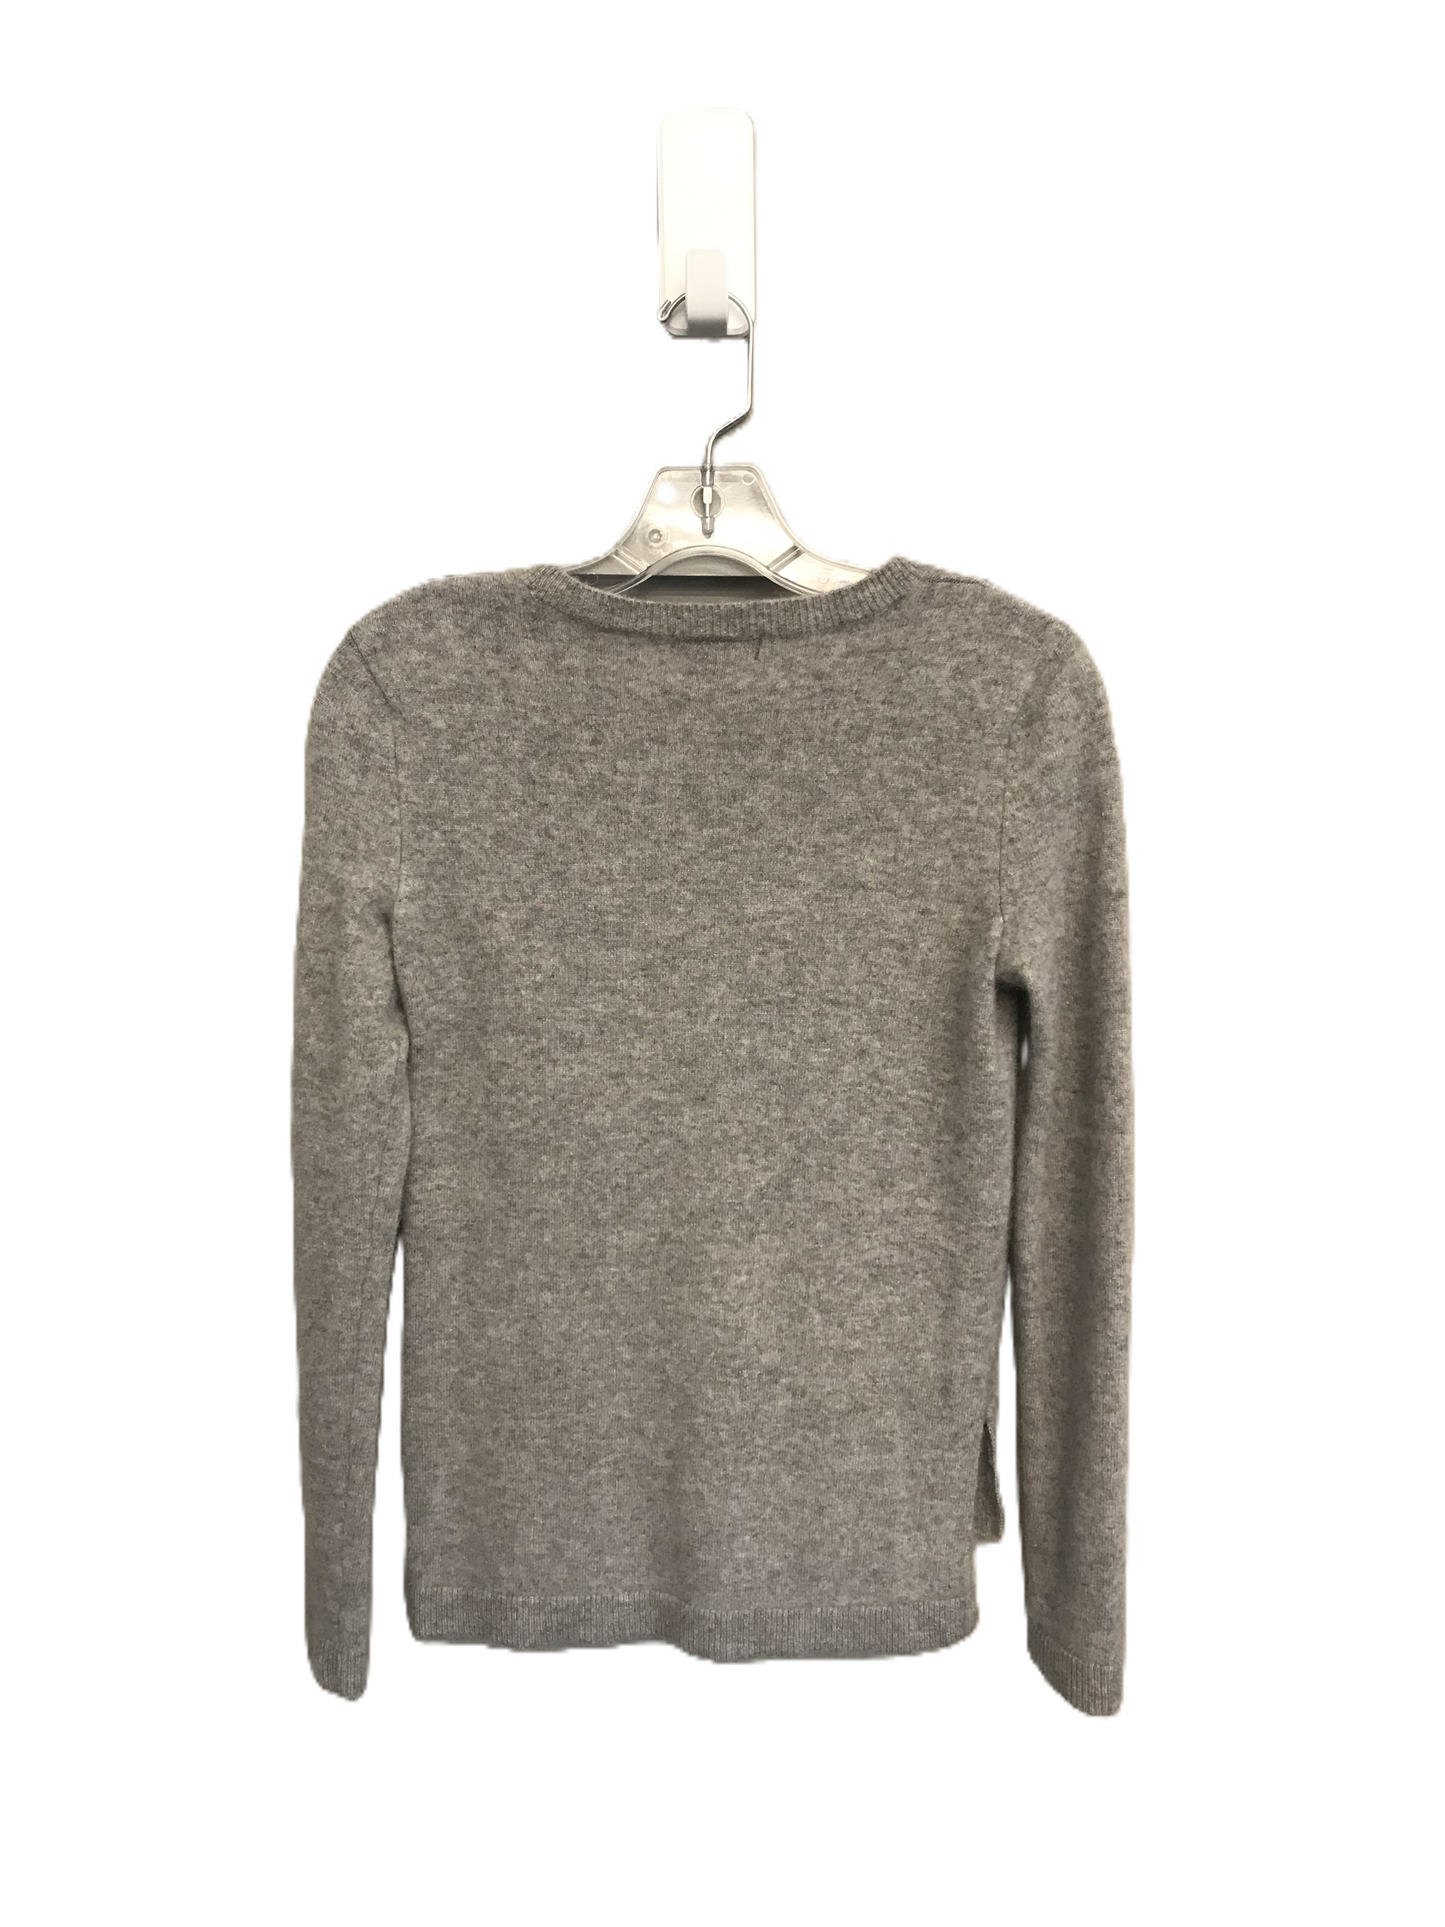 Grey Sweater Cashmere By Neiman Marcus, Size: Xs